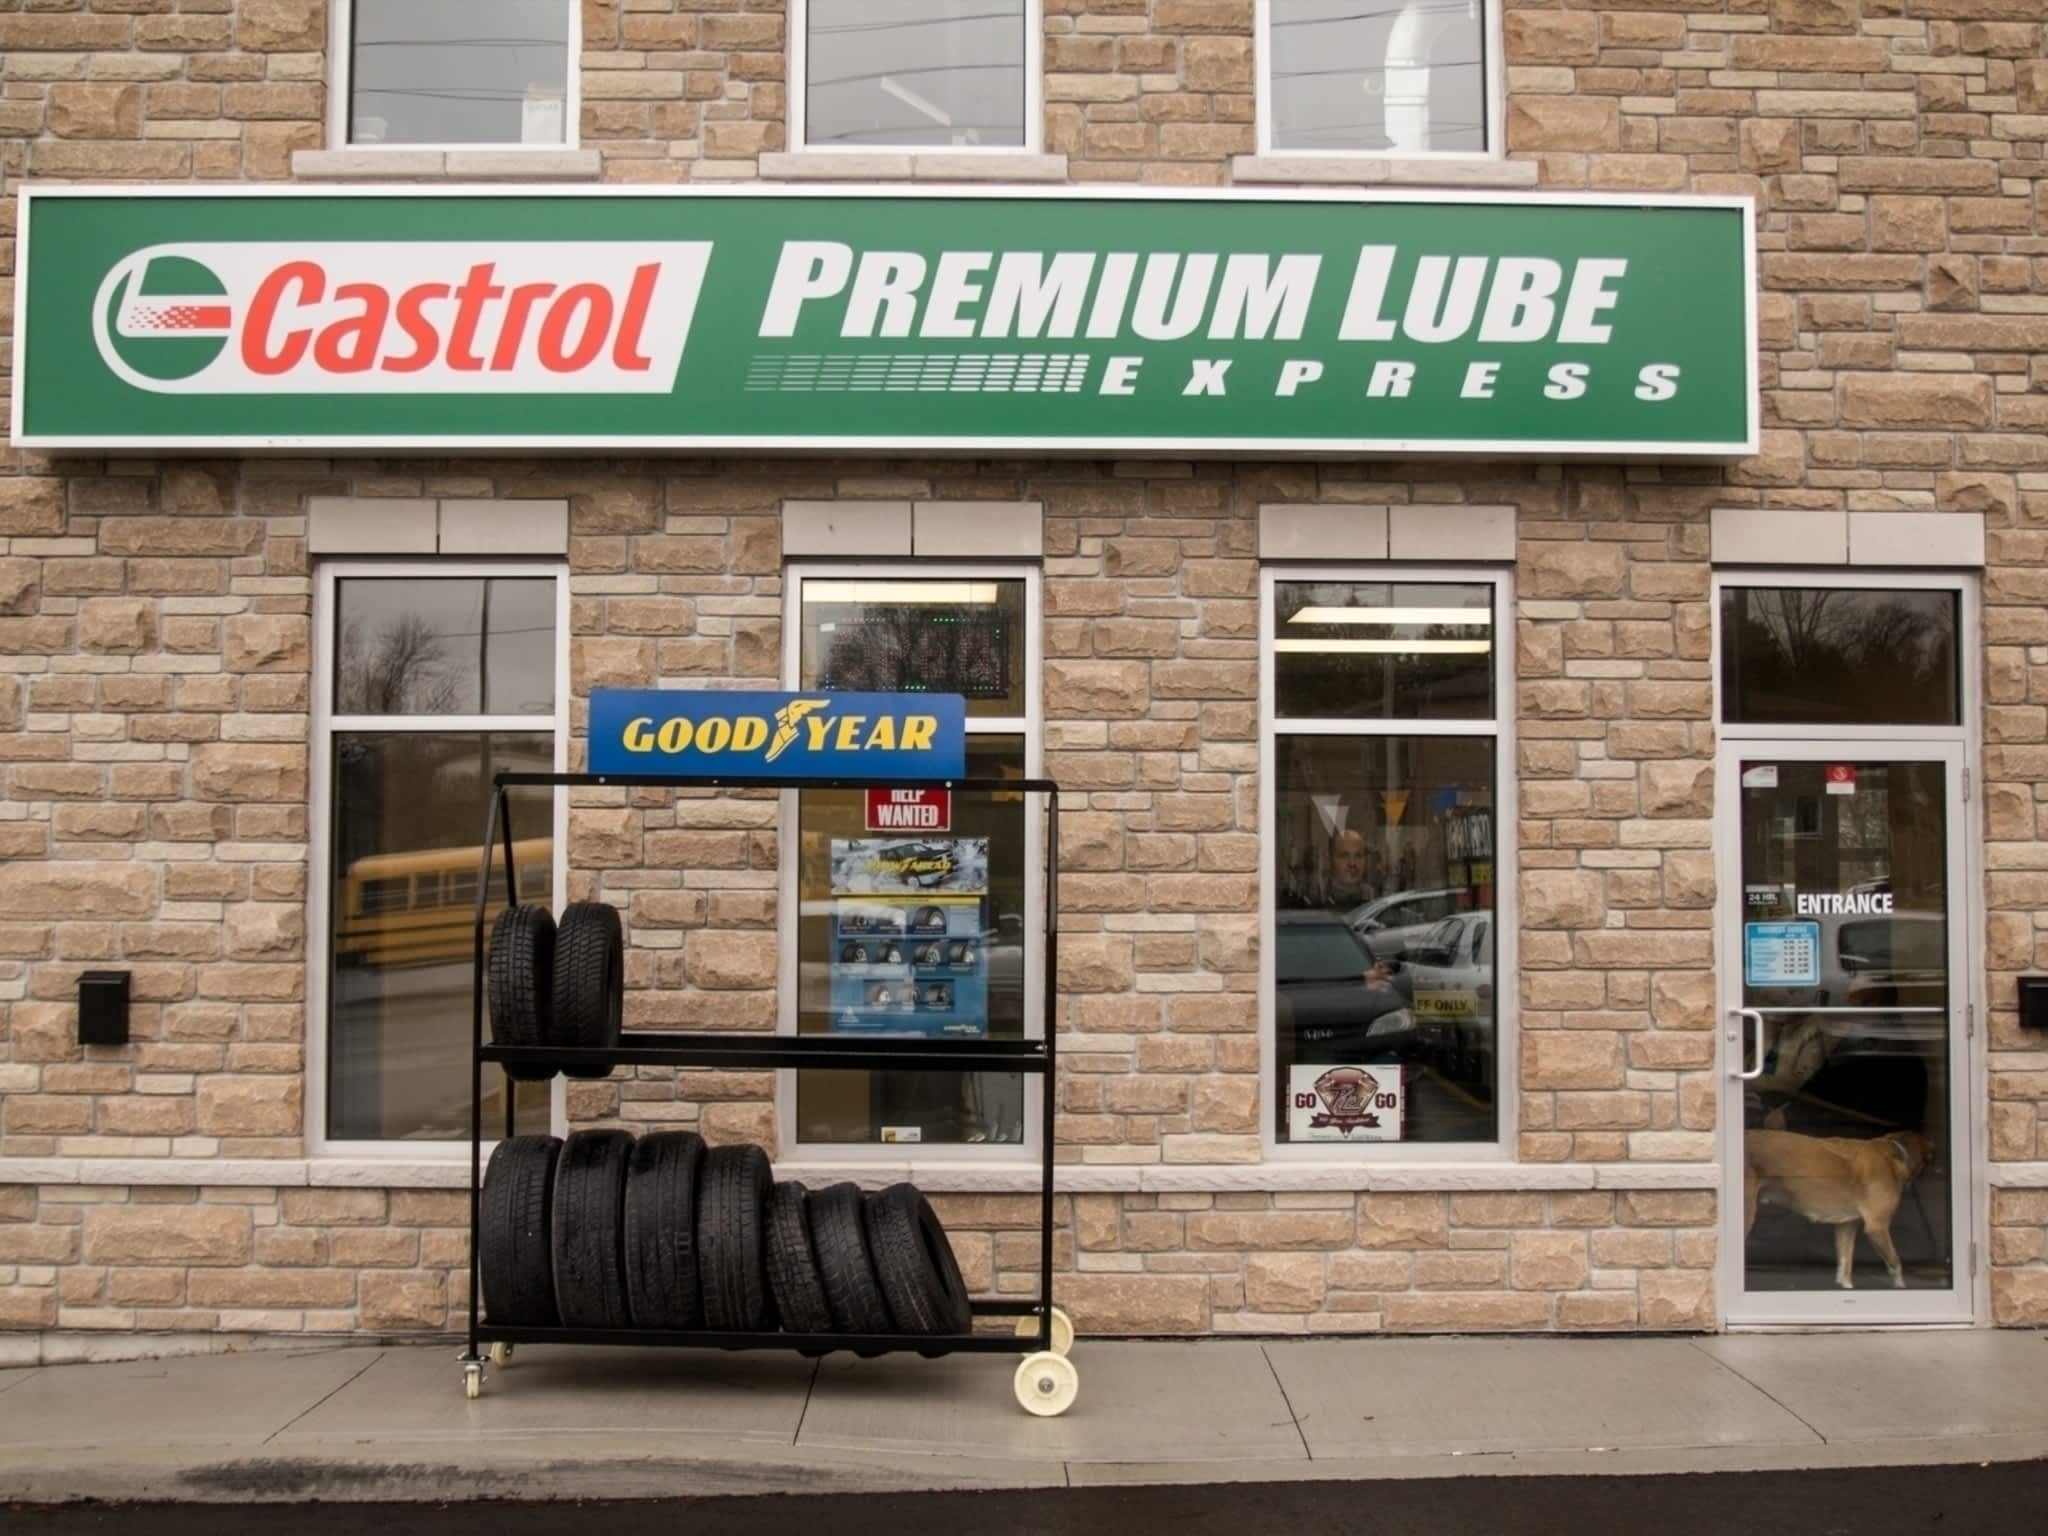 photo Castrol Express Oil Change & Car Cleaning Centre